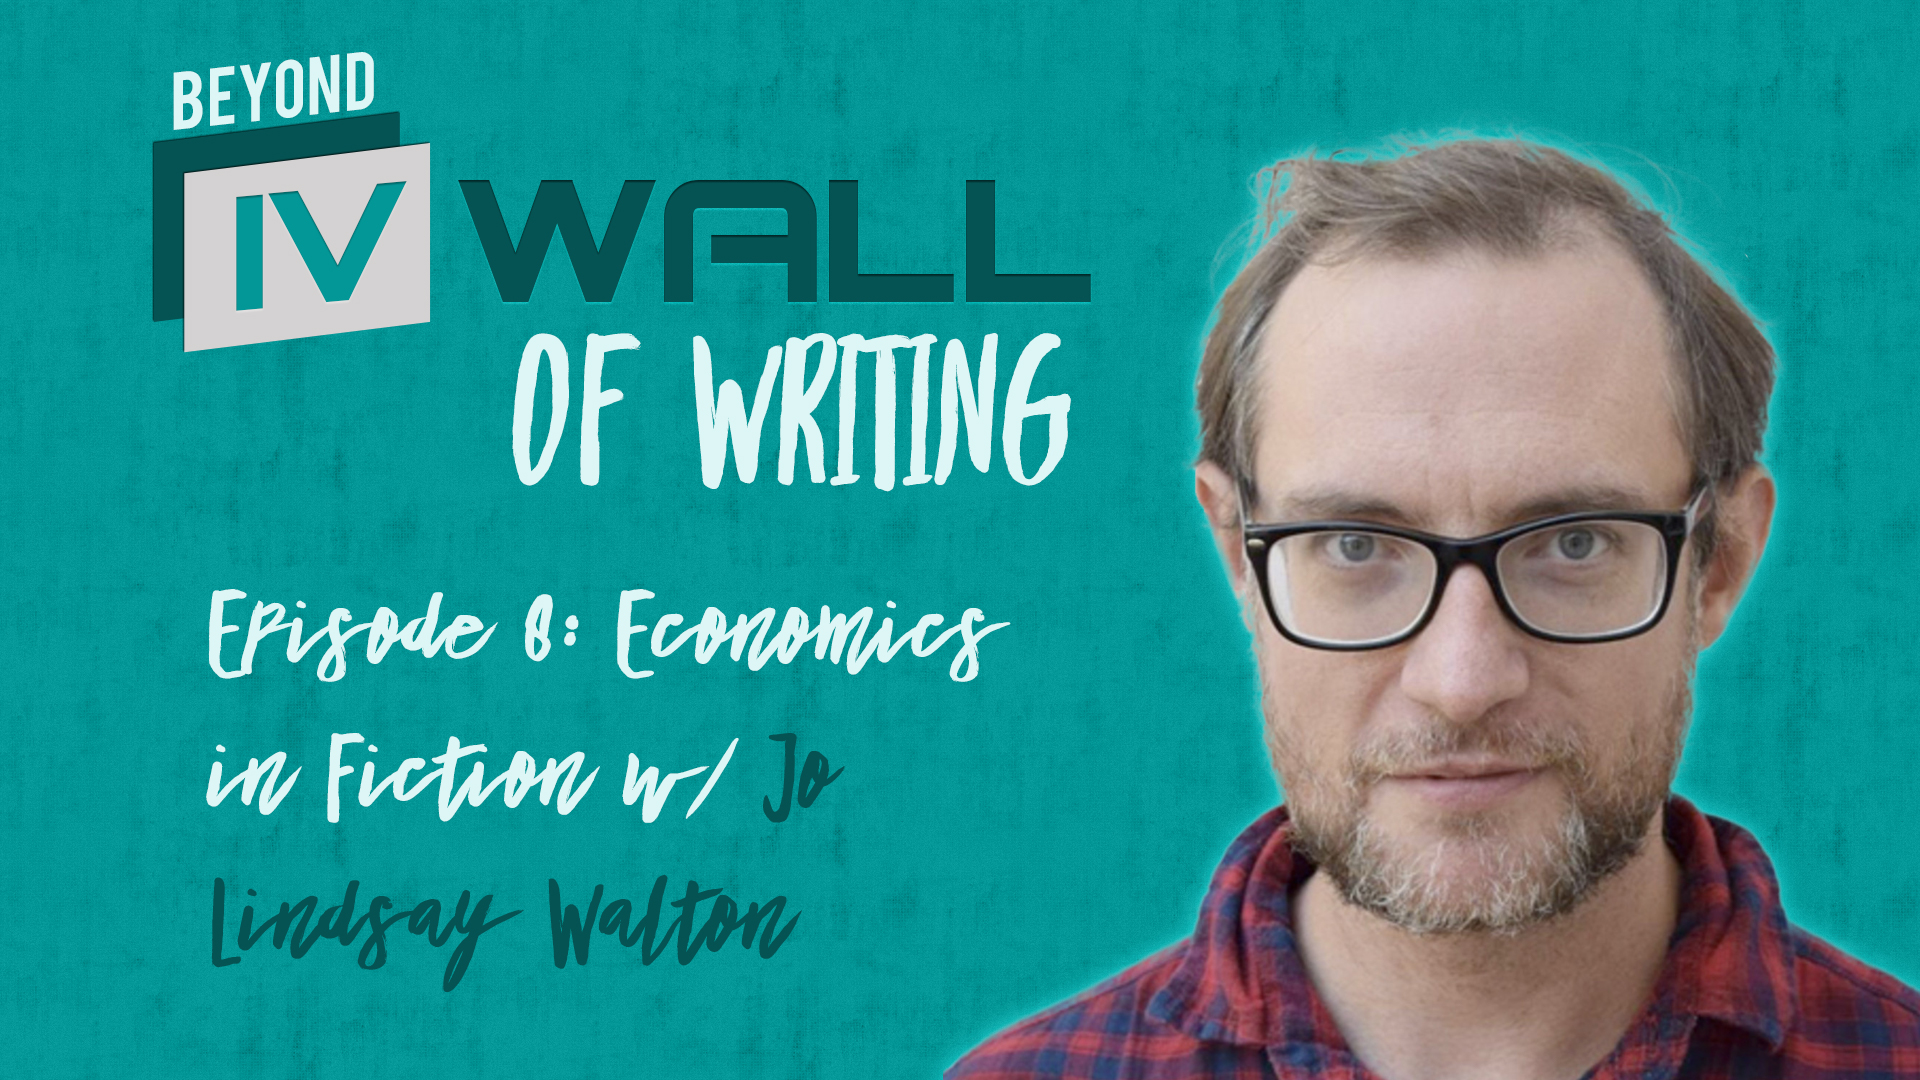 Beyond the IVWall of Writing: Episode 8- Economics in Fiction with Jo Lindsay Walton Part 1